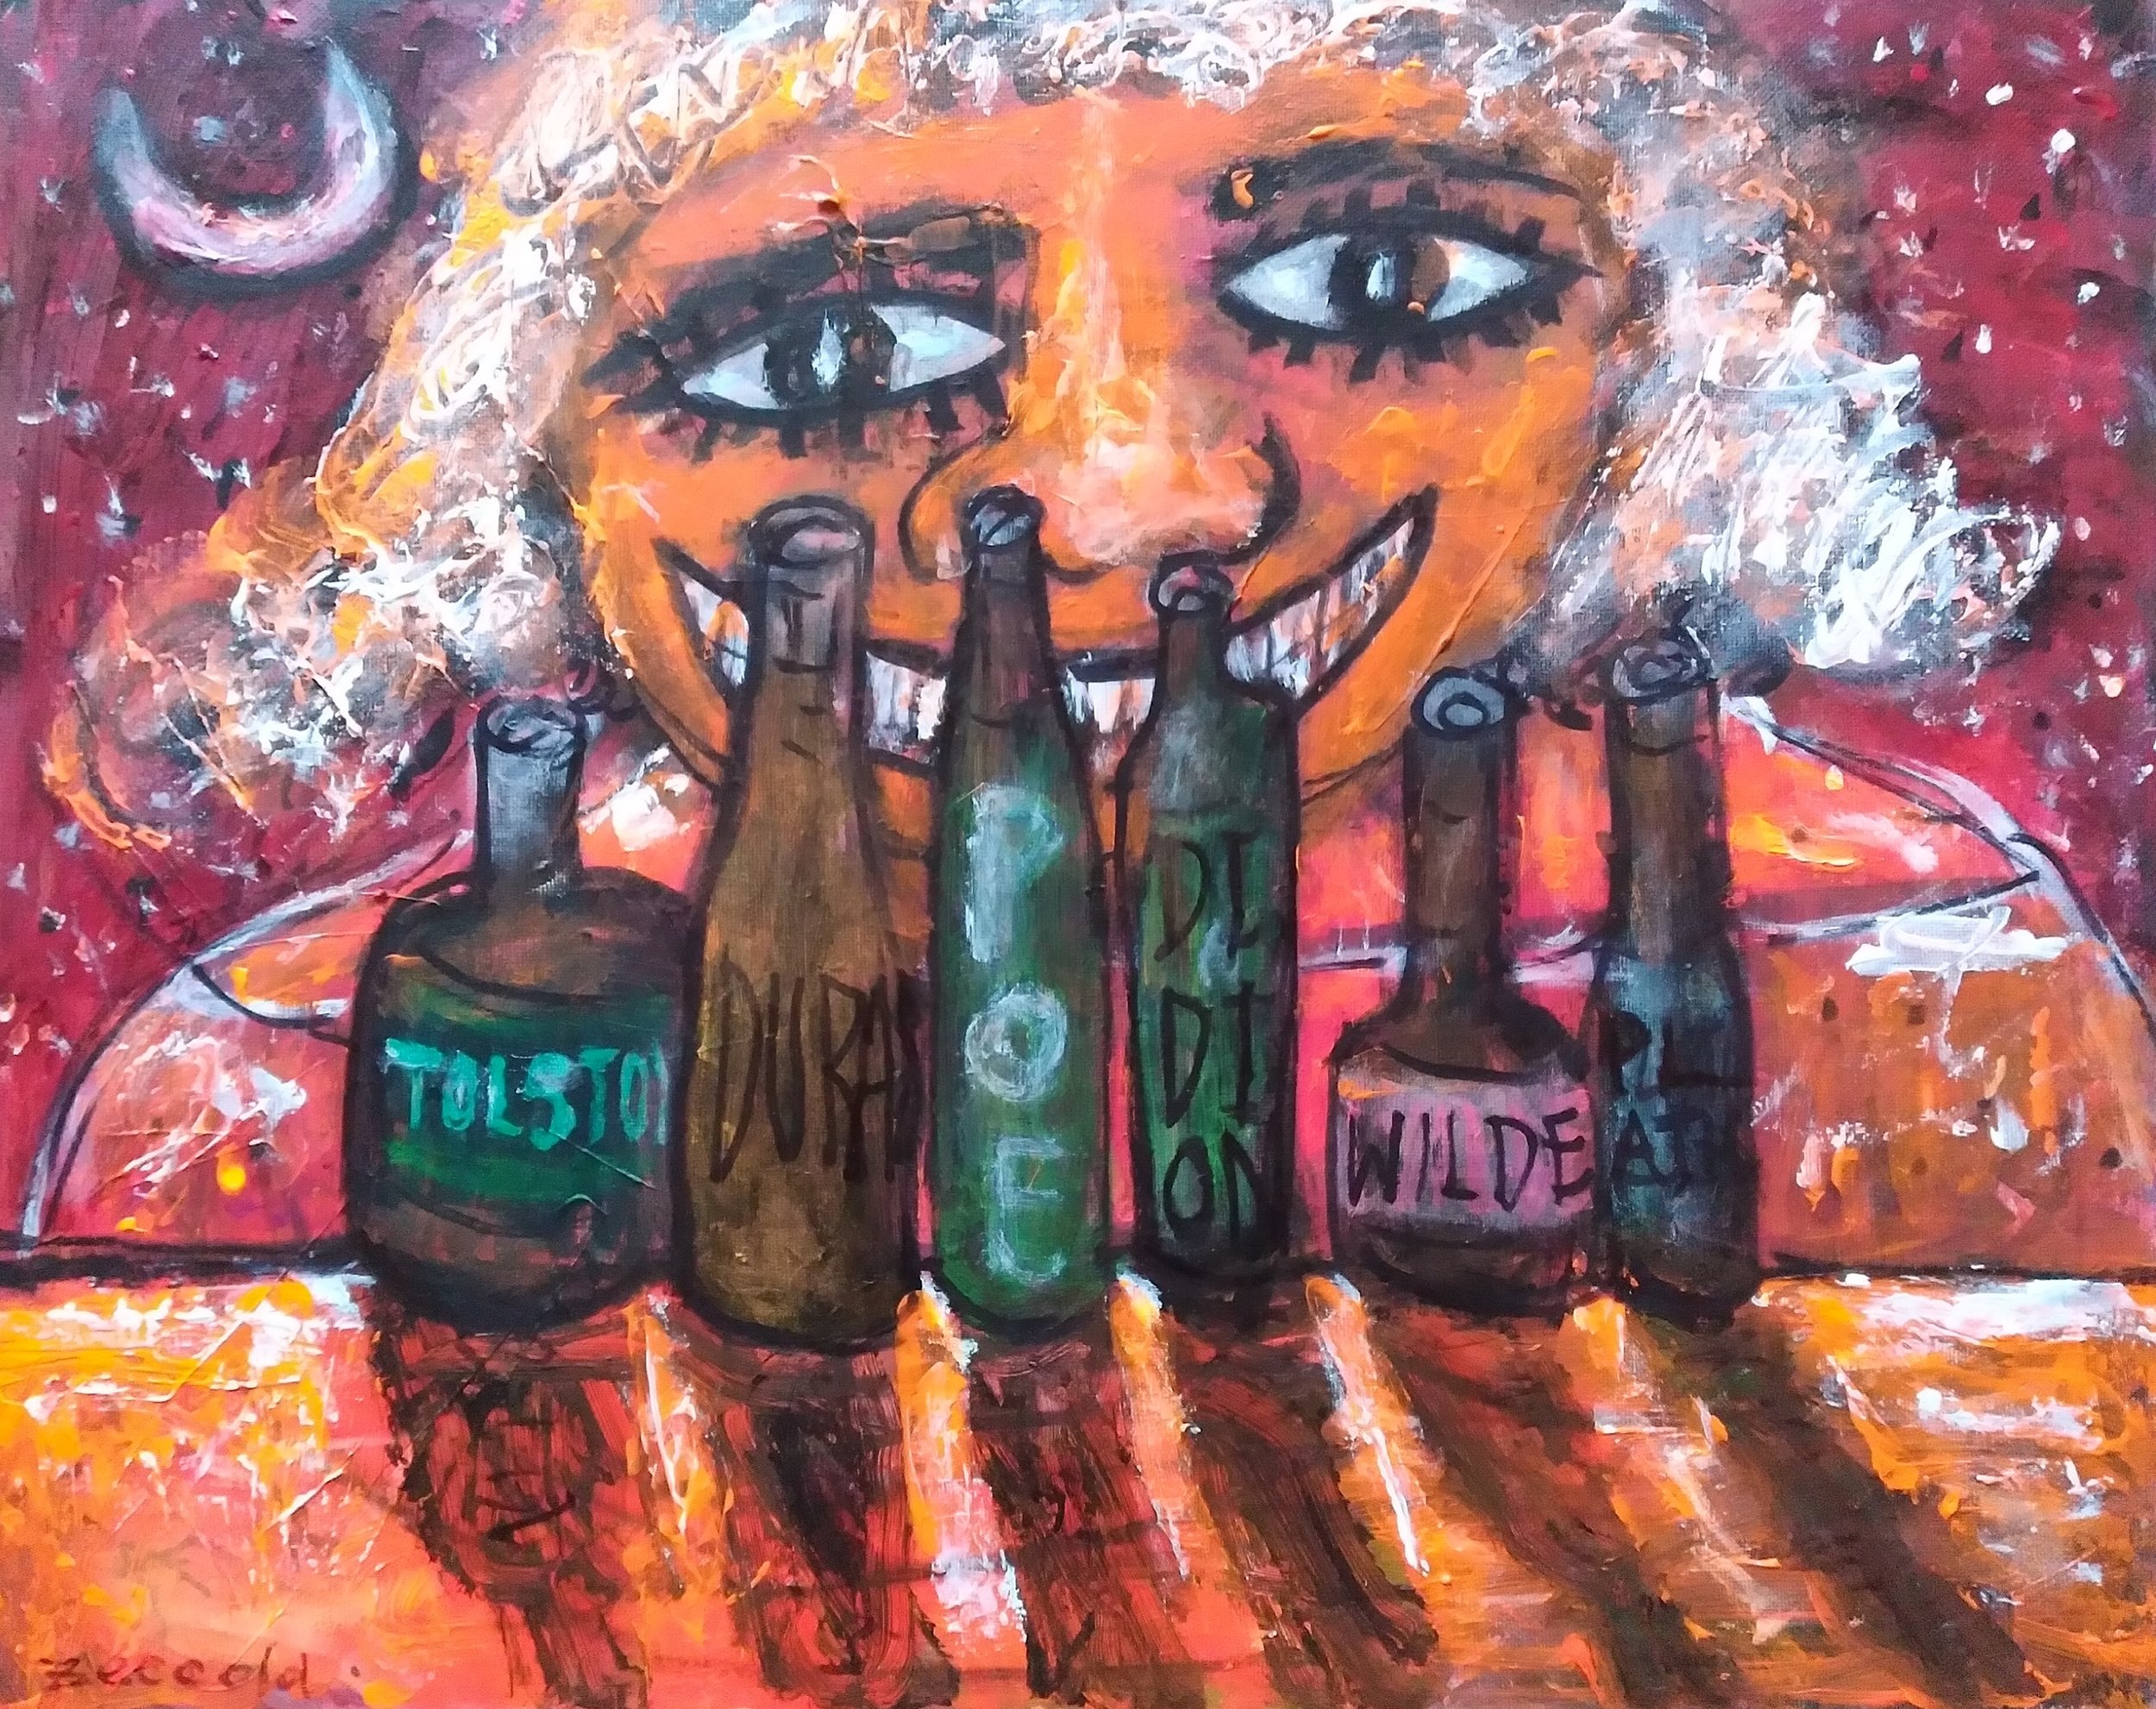 Message in a Bottle, 2019. Oil, acrylic, ink on canvas. 16” x 20”.